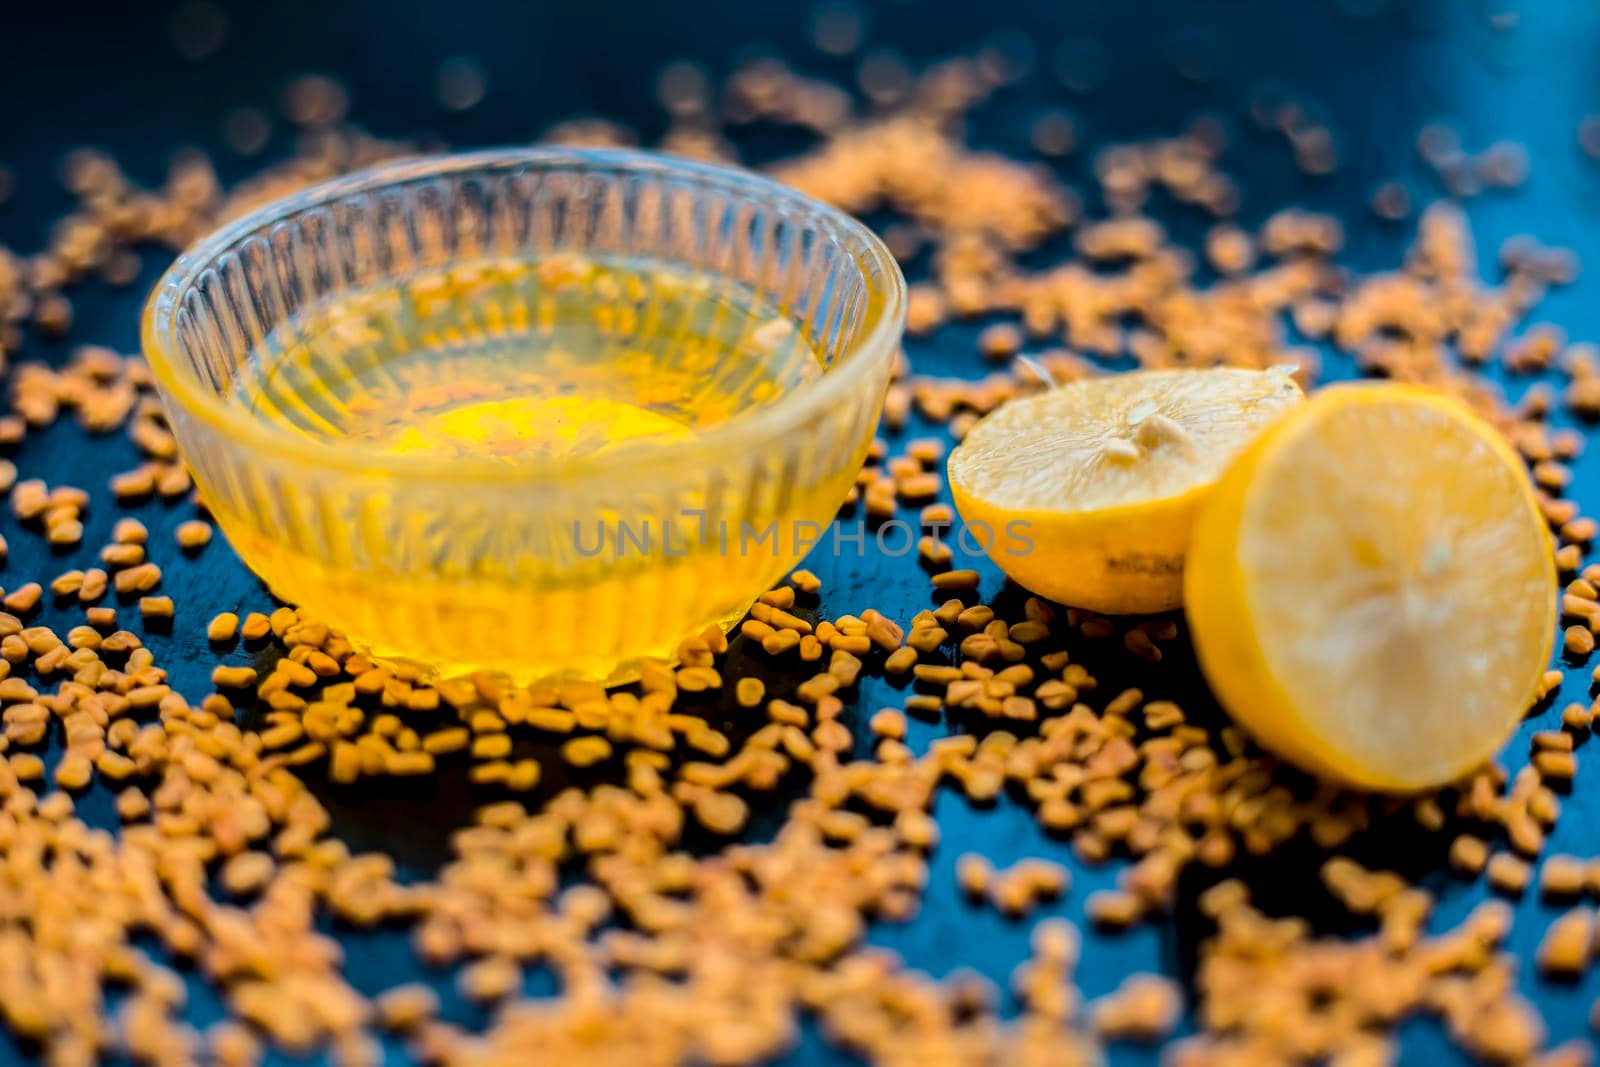 Famous natural method for dandruff on wooden surface in a glass bowl consisting of fenugreek seeds powder well mixed with lemon juice.With raw lemons and fenugreek seeds on the present on the surface.